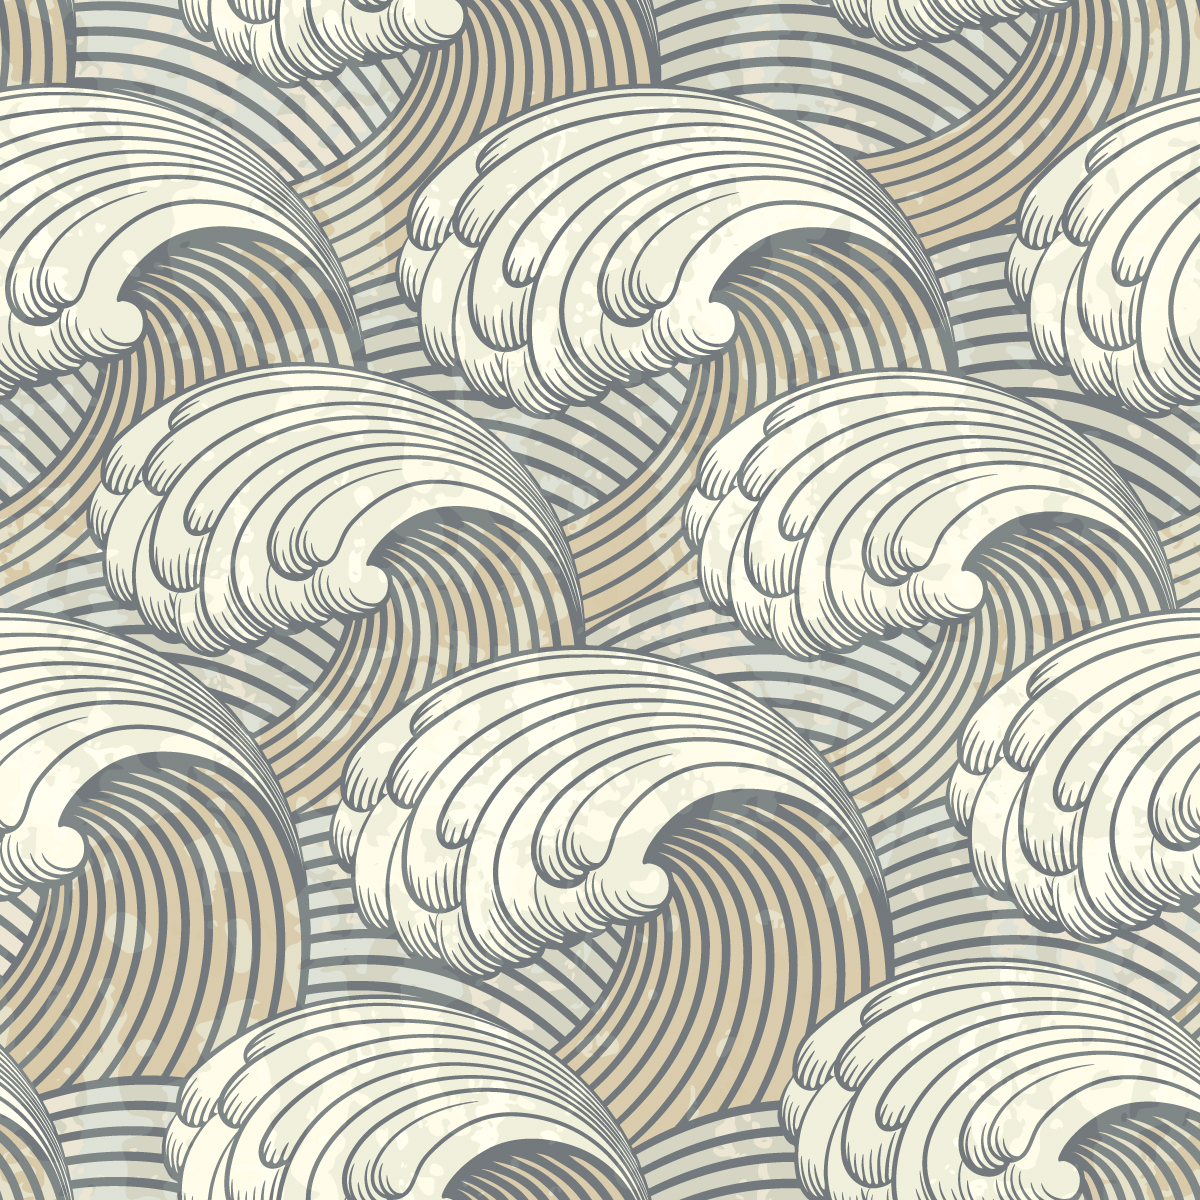 Japanese Wave Pattern Vector